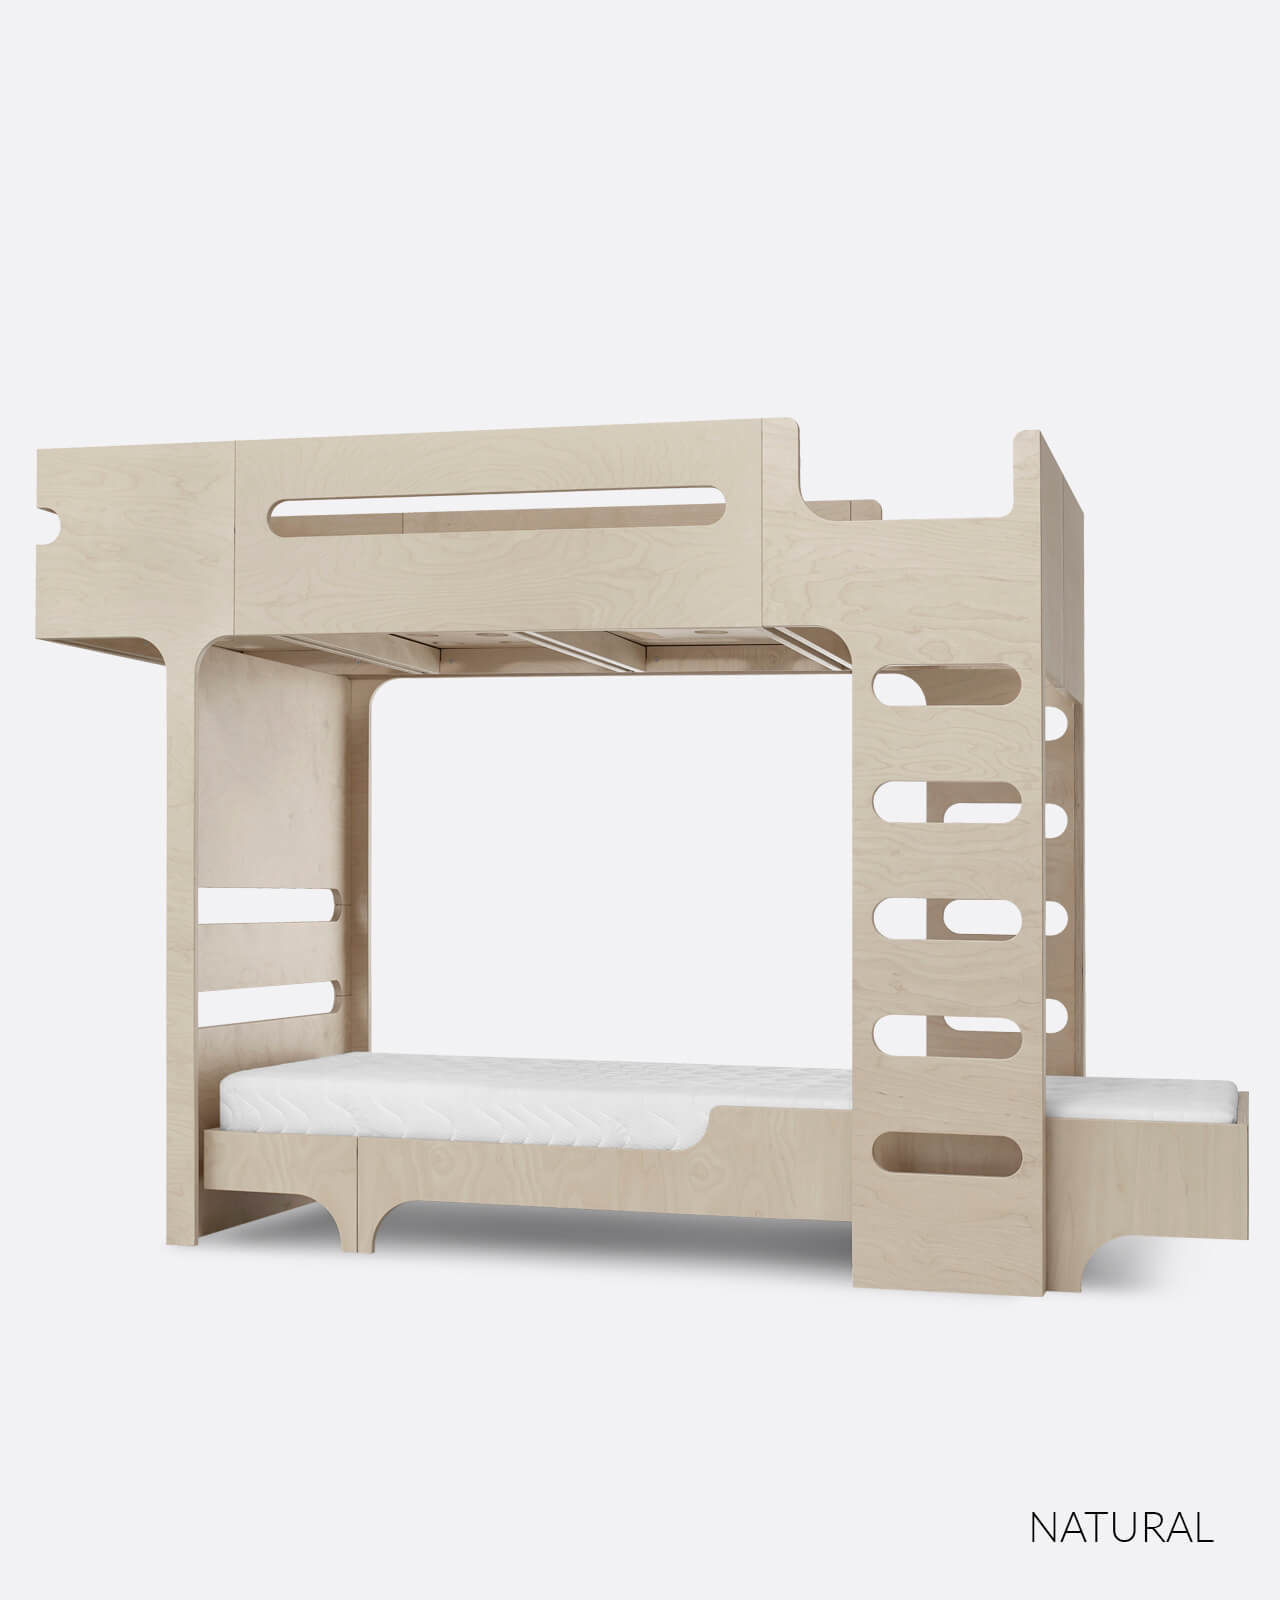 F A75 Bunk Bed For 2 Children, Plywood For Bunk Bed